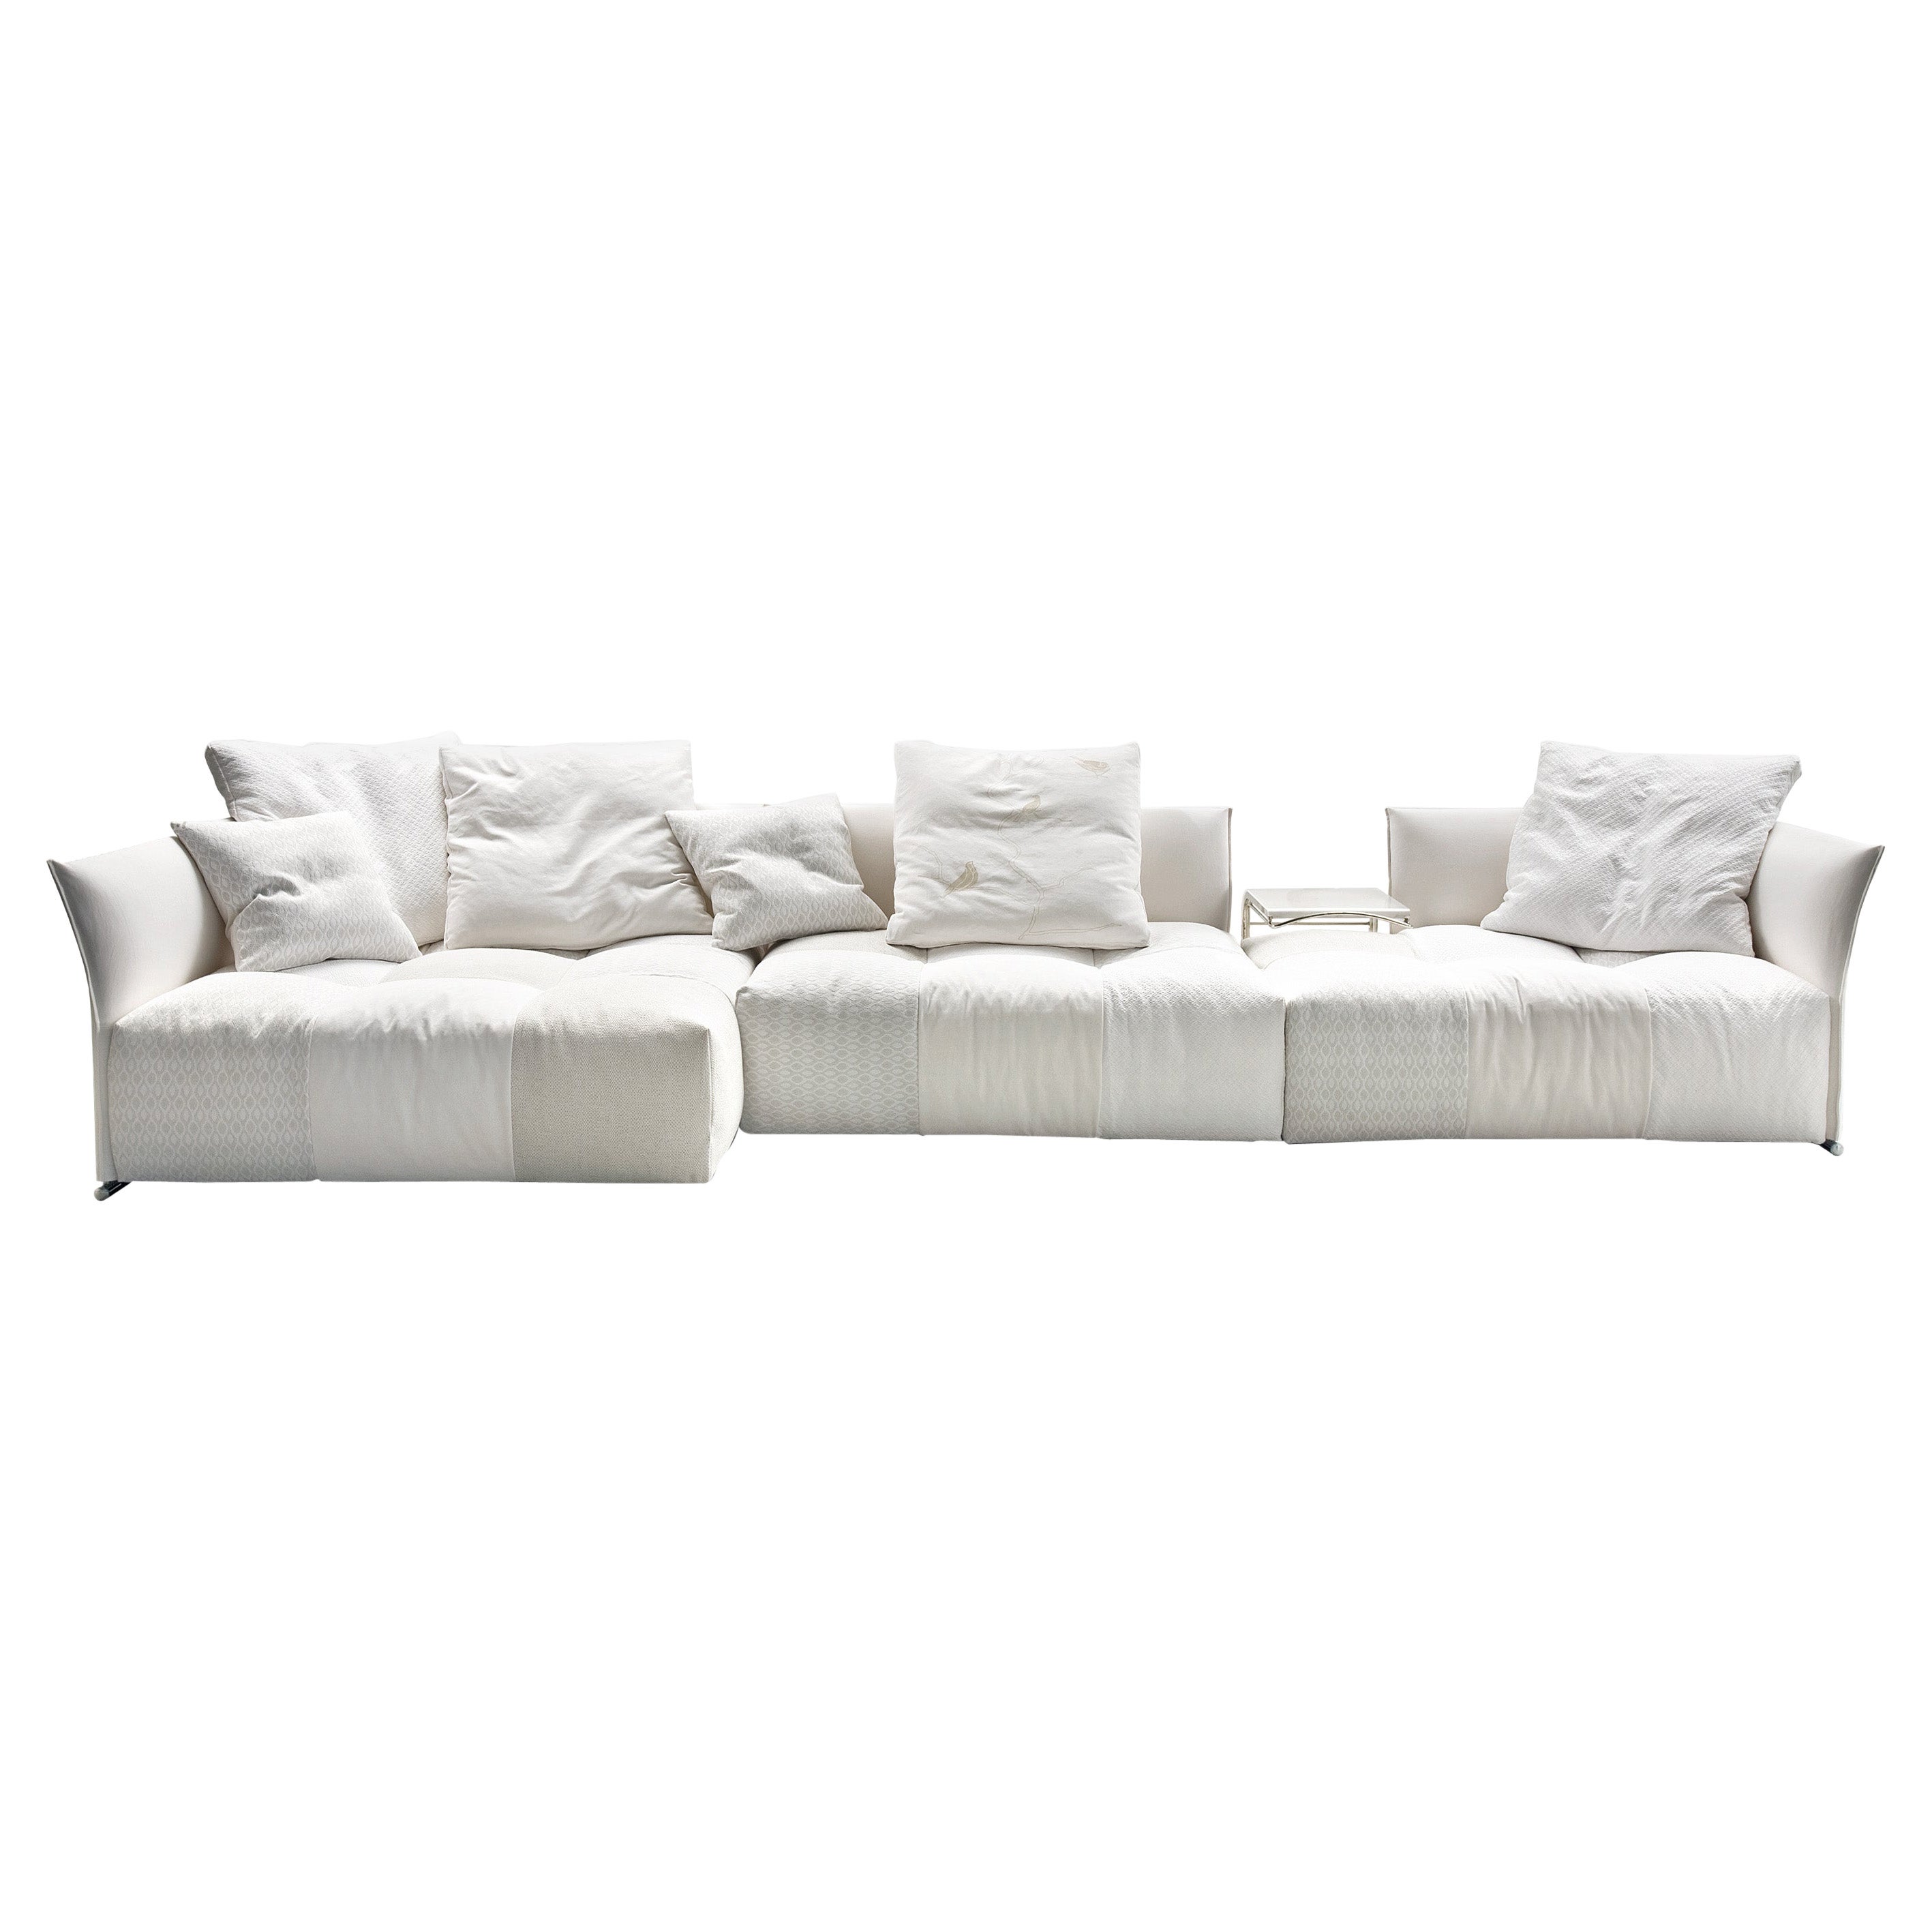 Pixel Sectional Sofa in Patchwork Upholstery by Sergio Bicego For Sale